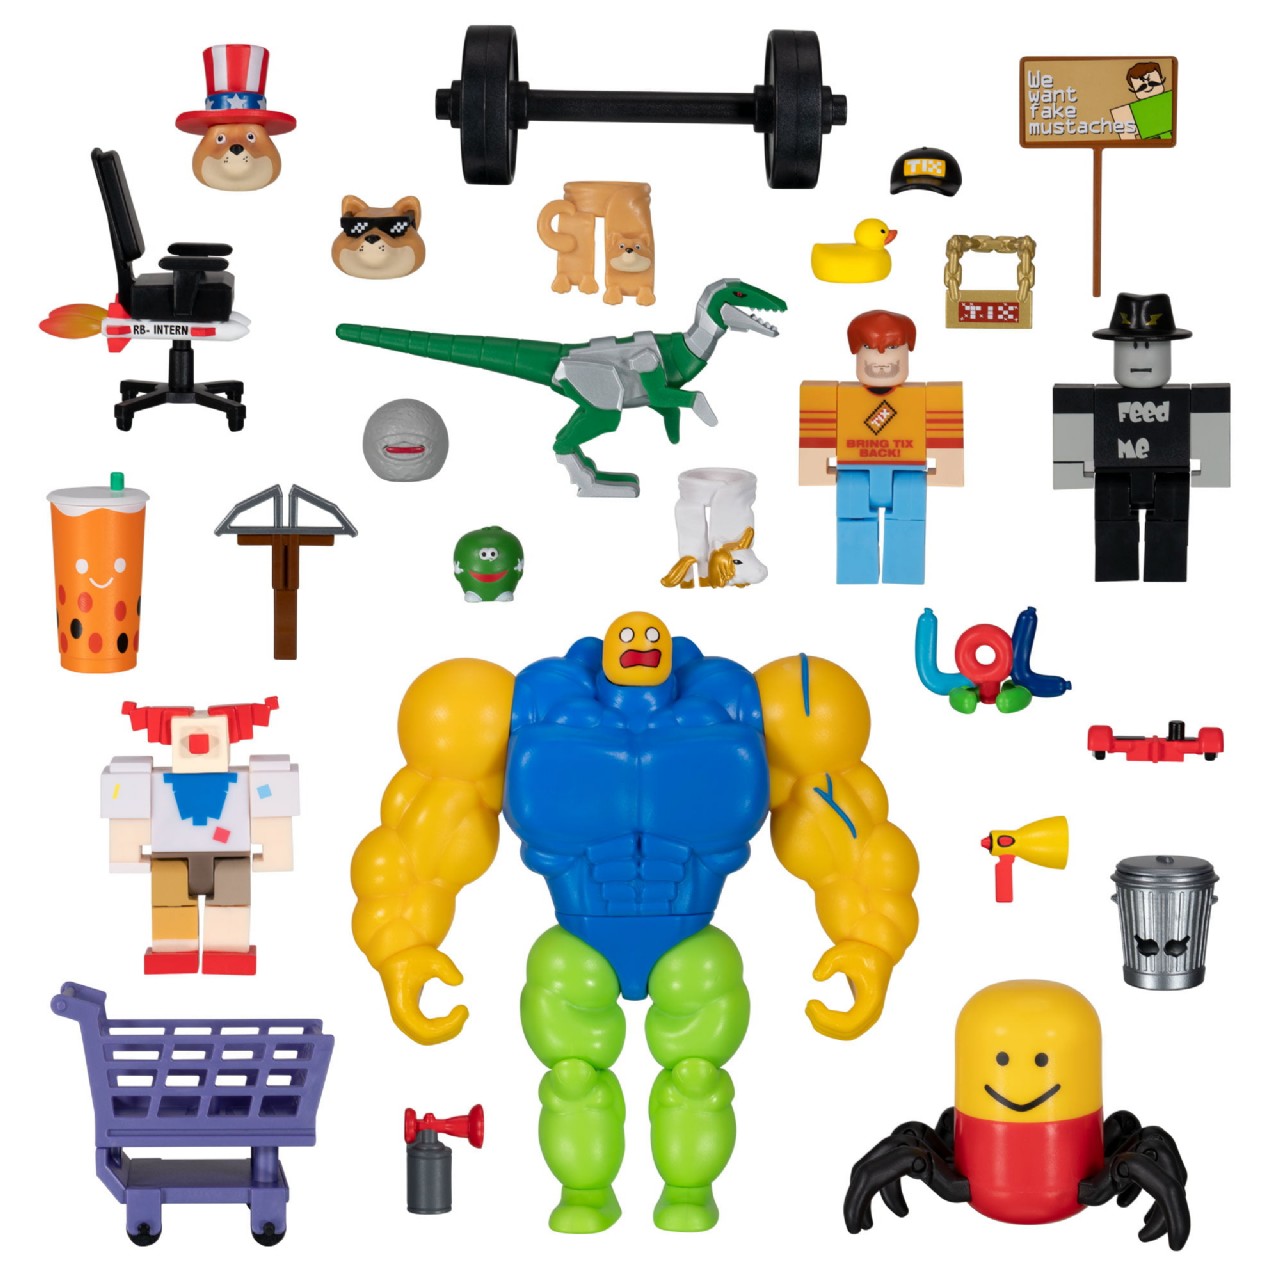 Roblox toys and merchandise